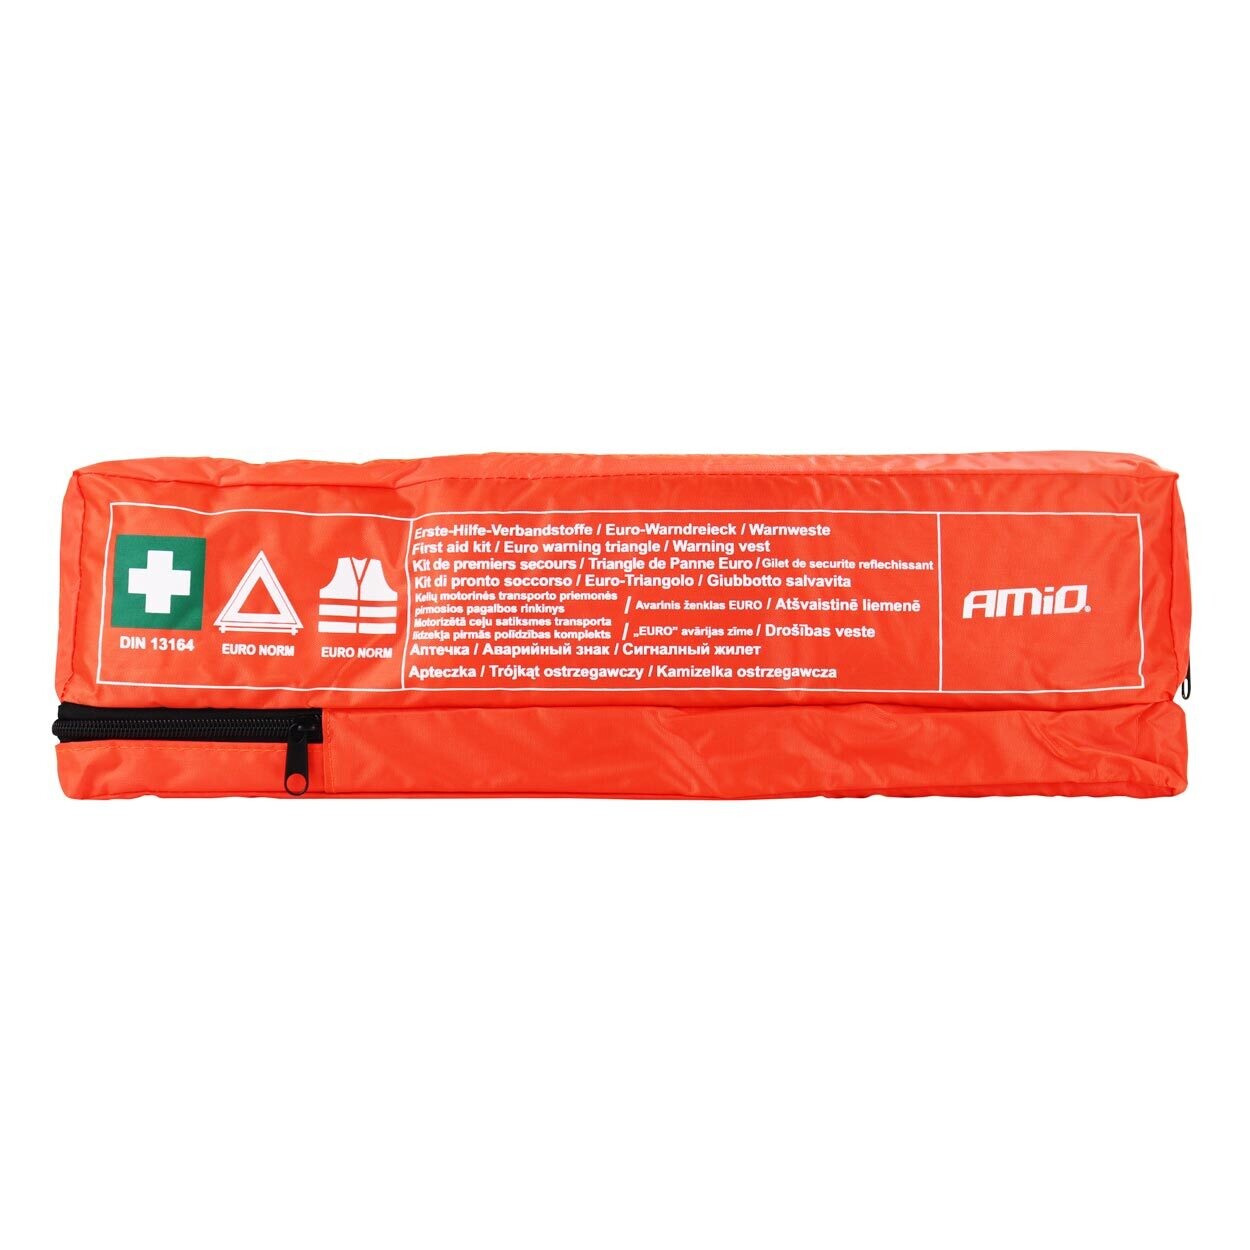 COMBI PLUS set (First aid kit, vest, warning triangle)